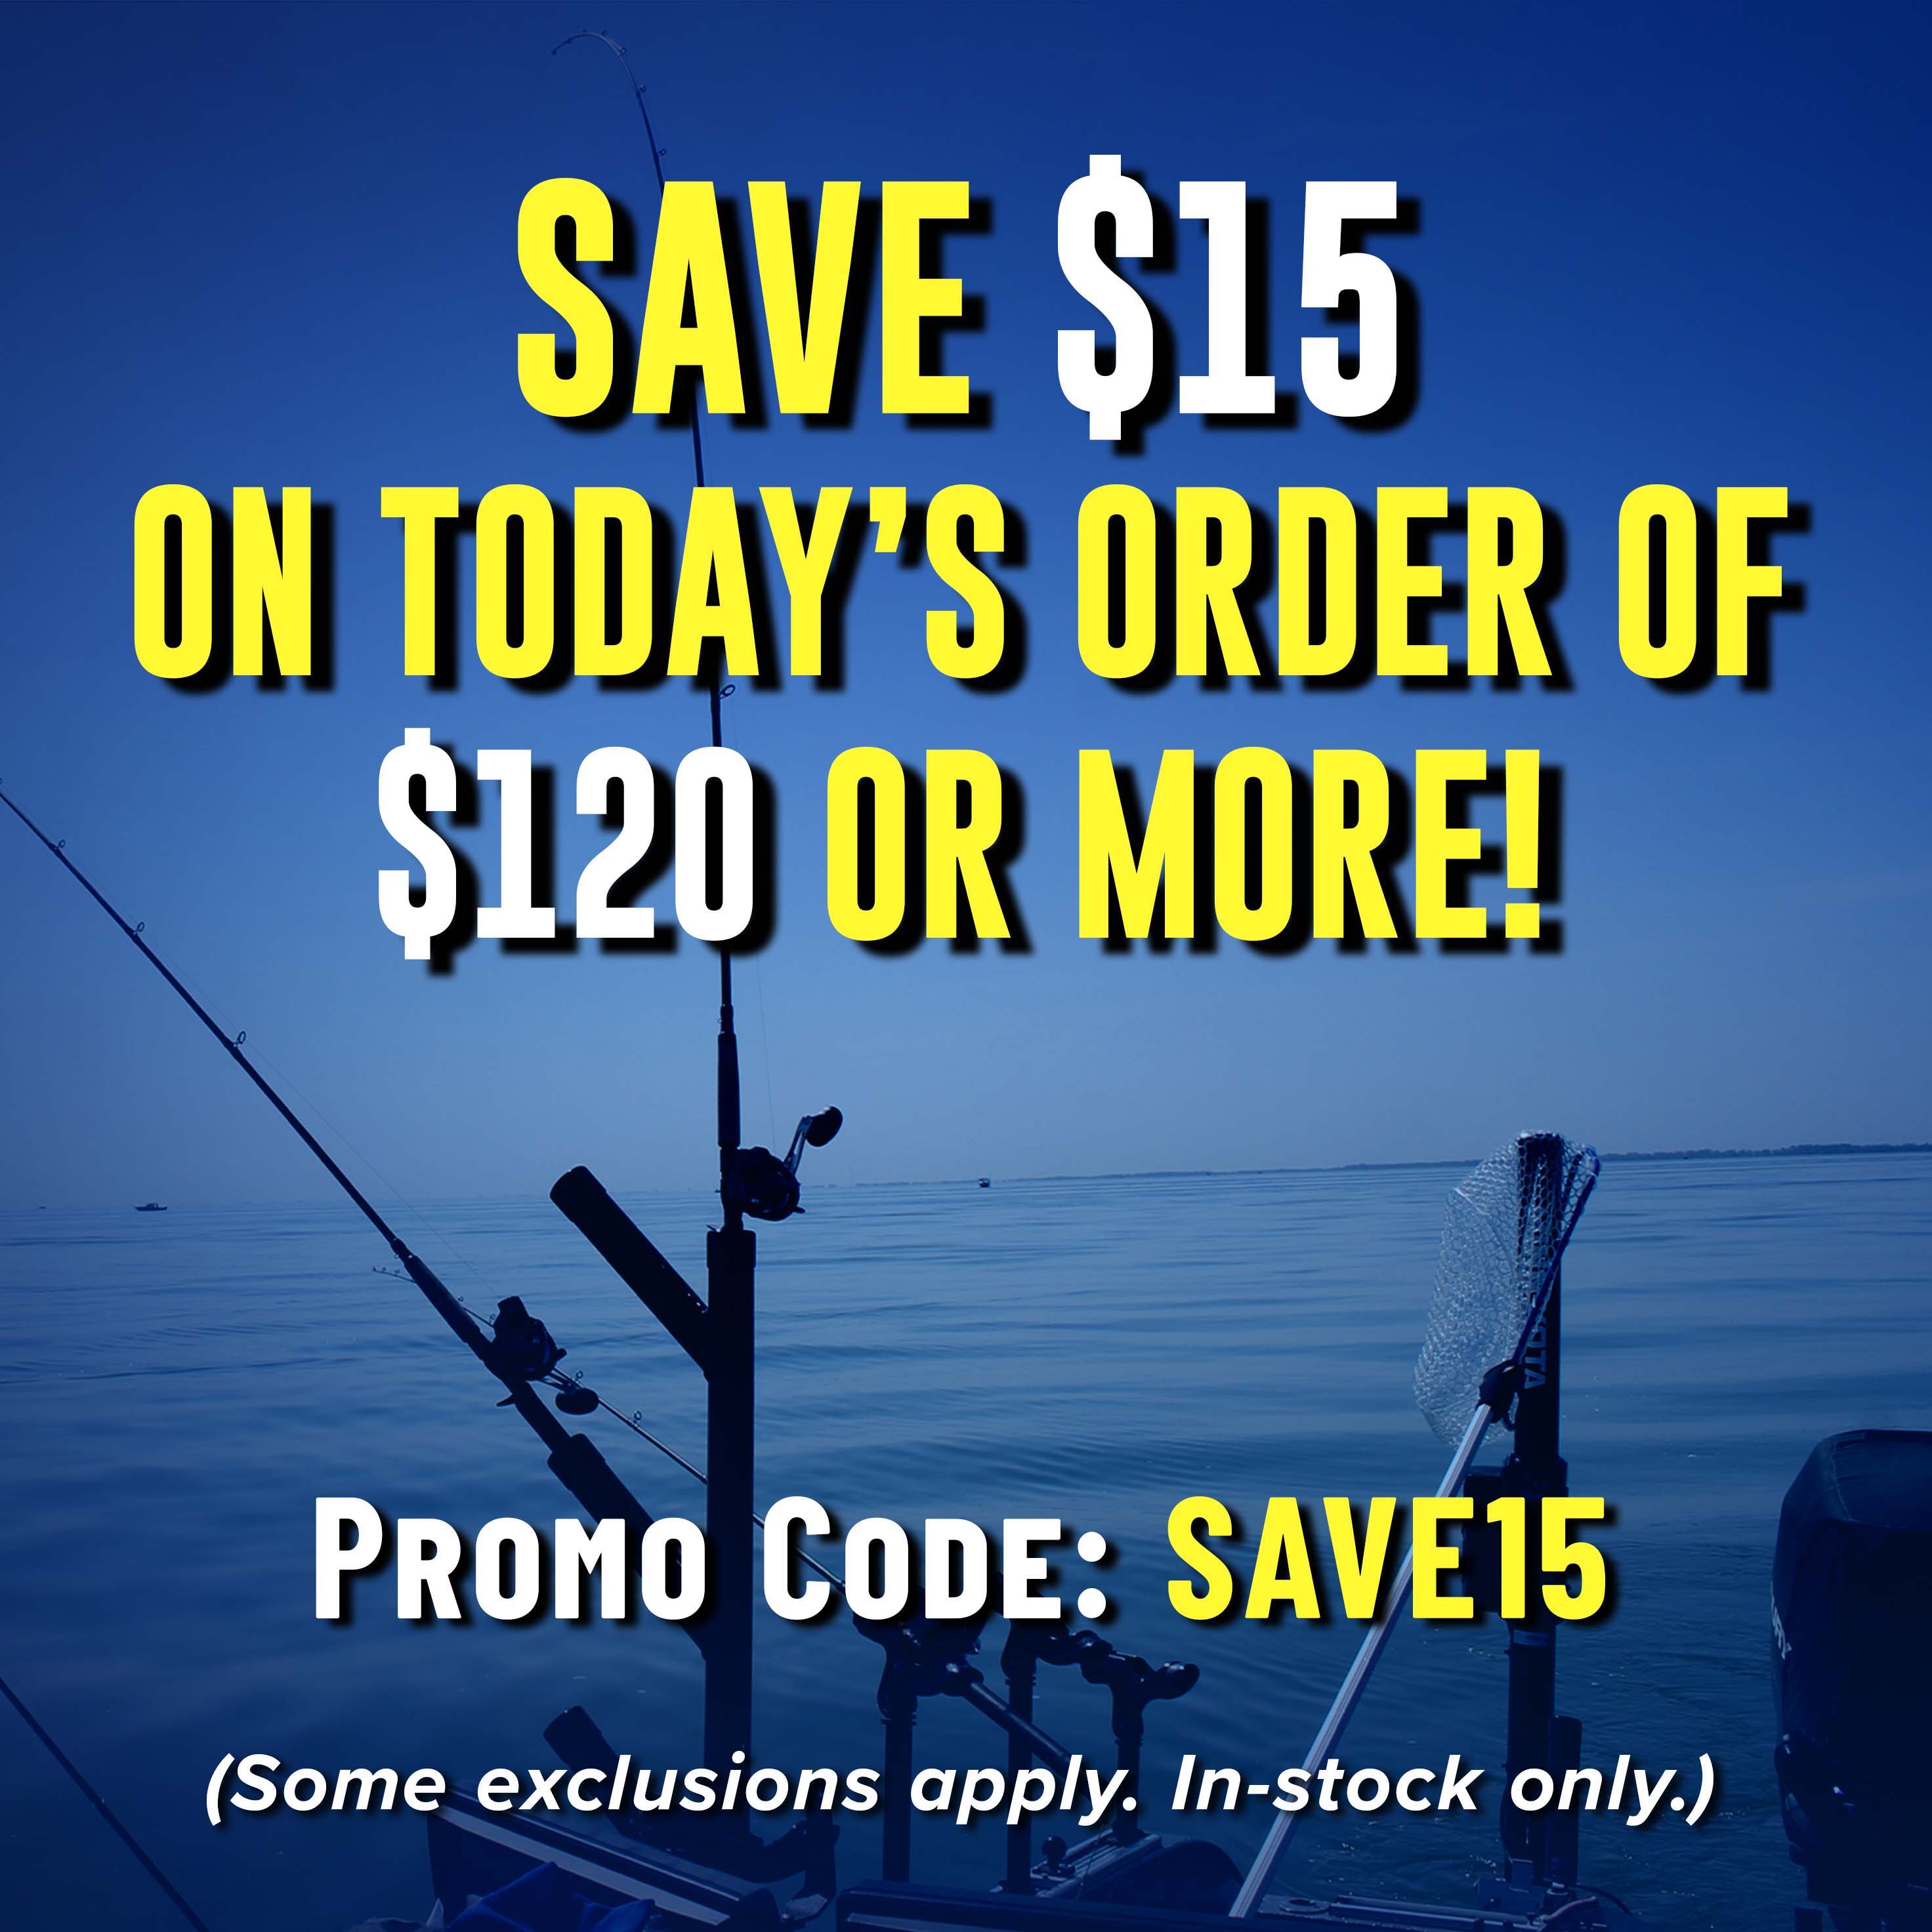 Save $15 On Today's Order of $120 or More! Promo Code: SAVE15